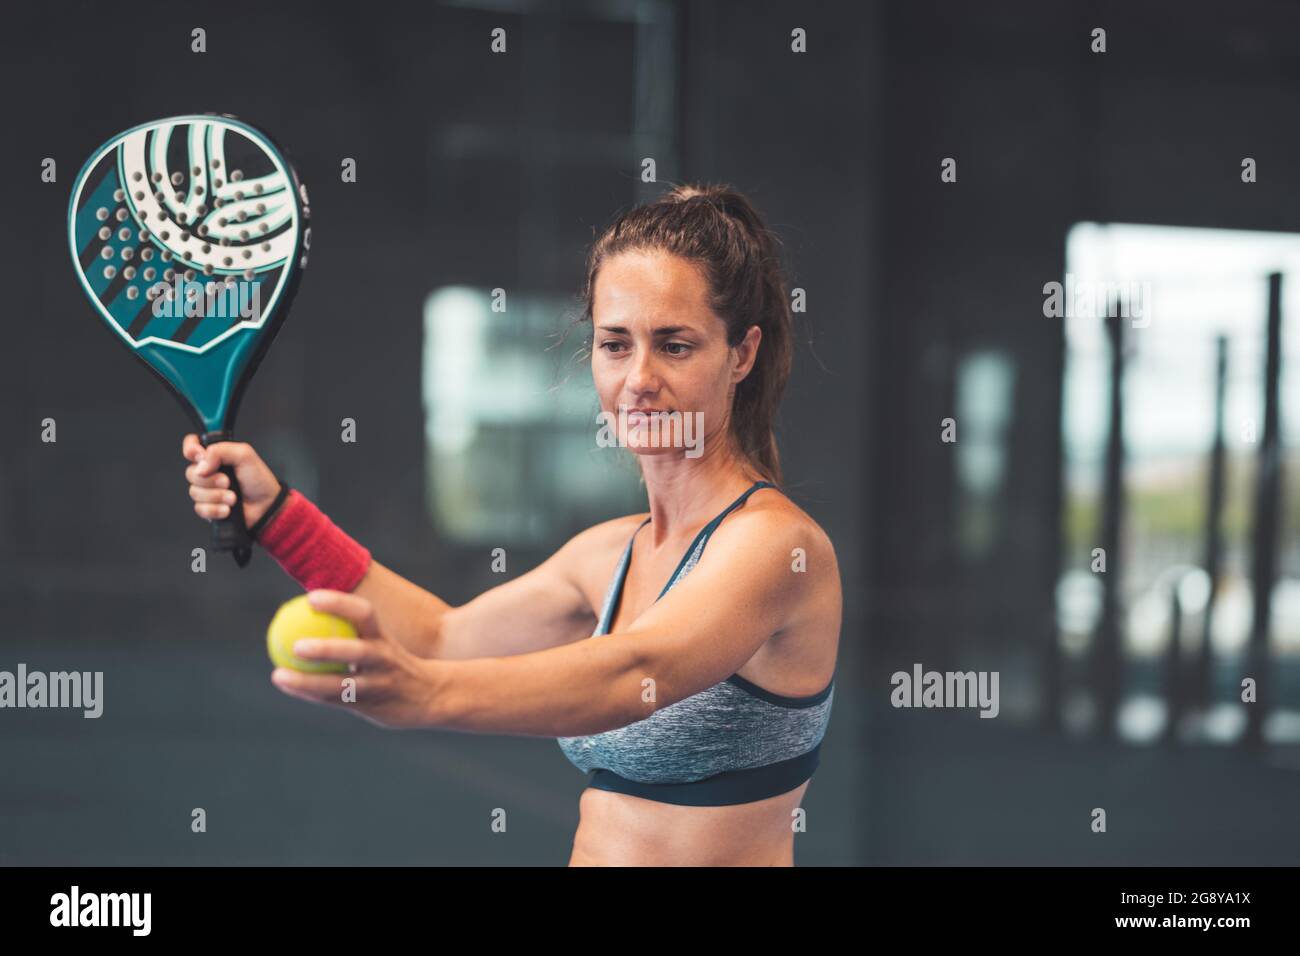 Padel tennis player ready to make the service Stock Photo